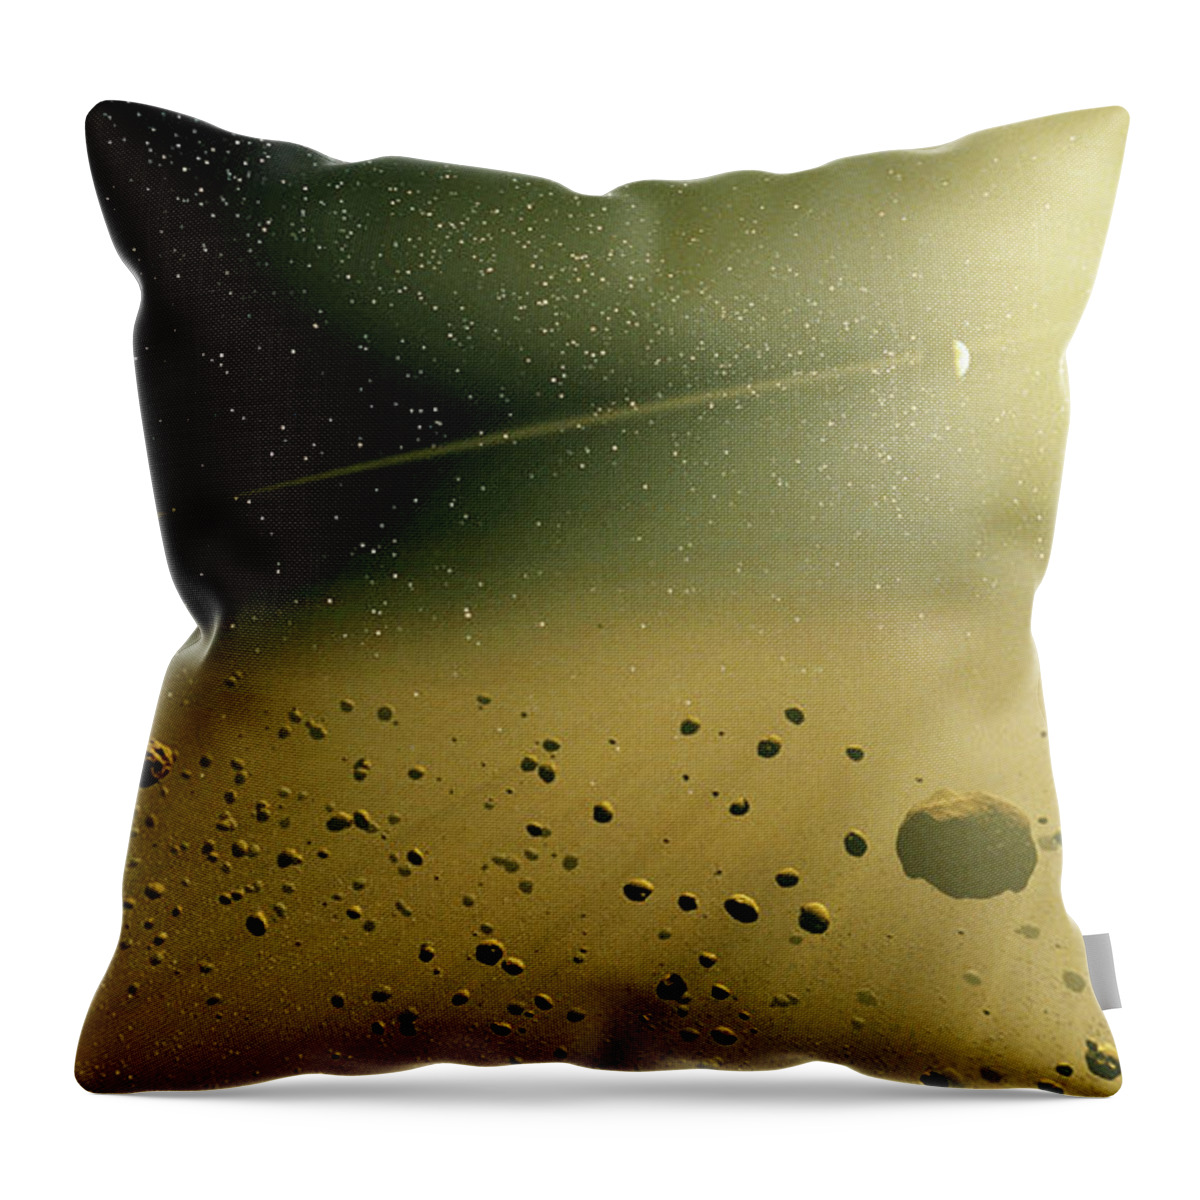 Outdoors Throw Pillow featuring the photograph Disk Debris In Outer Fringe Of Solar by Stocktrek